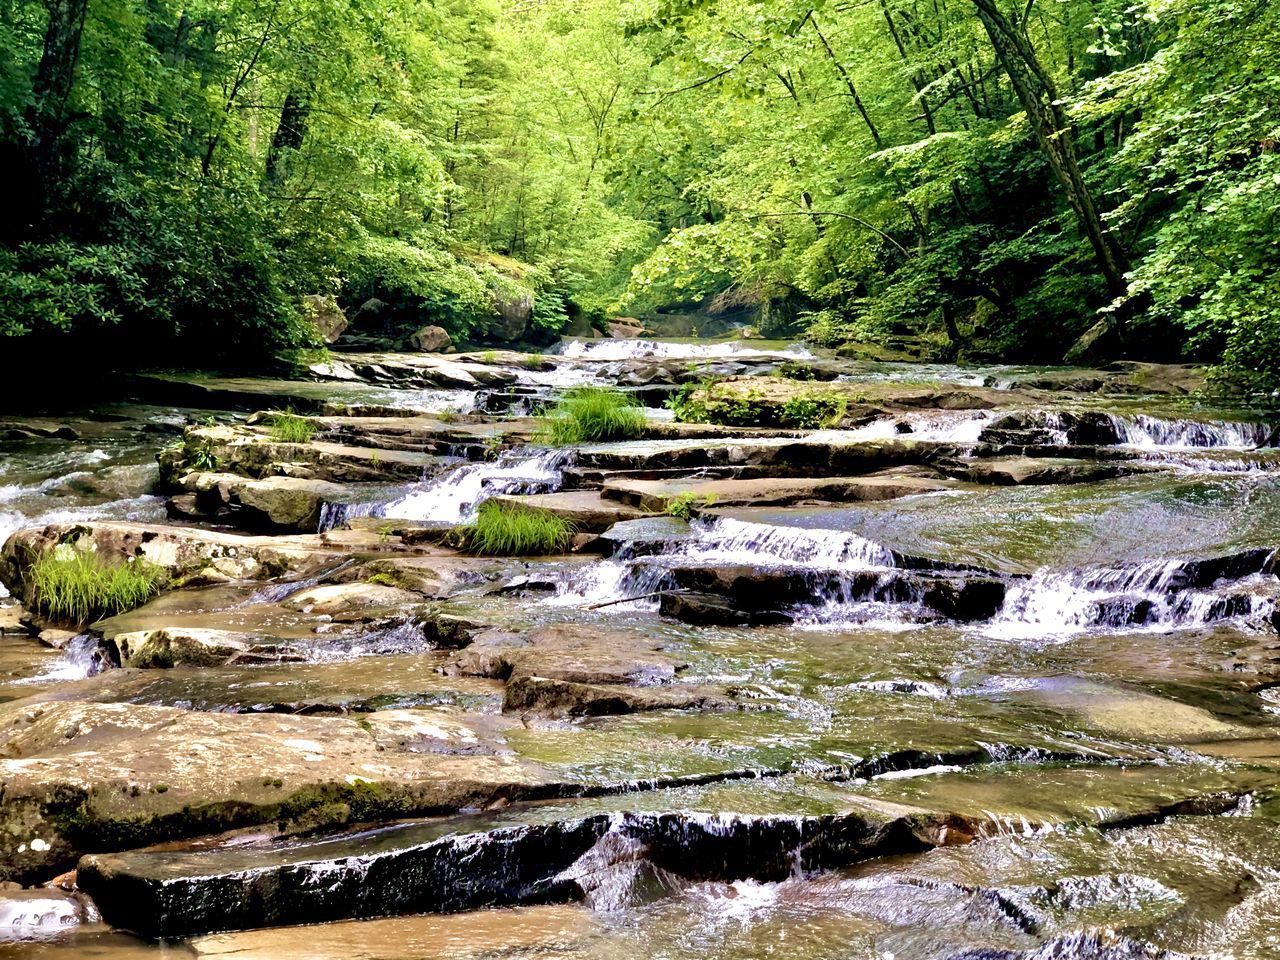 SCENIC VIEW OF STREAM IN FOREST